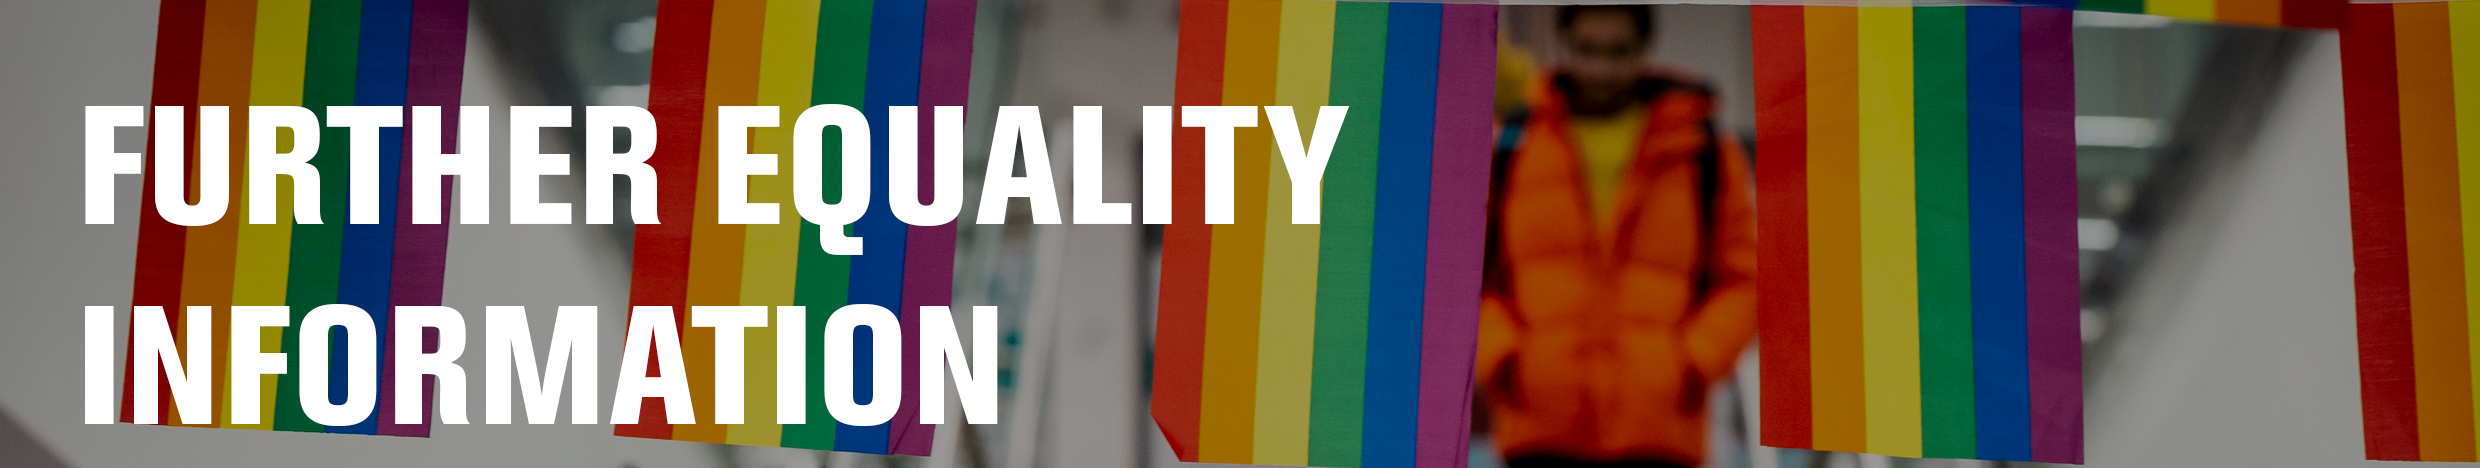 Equality and diversity at DMU